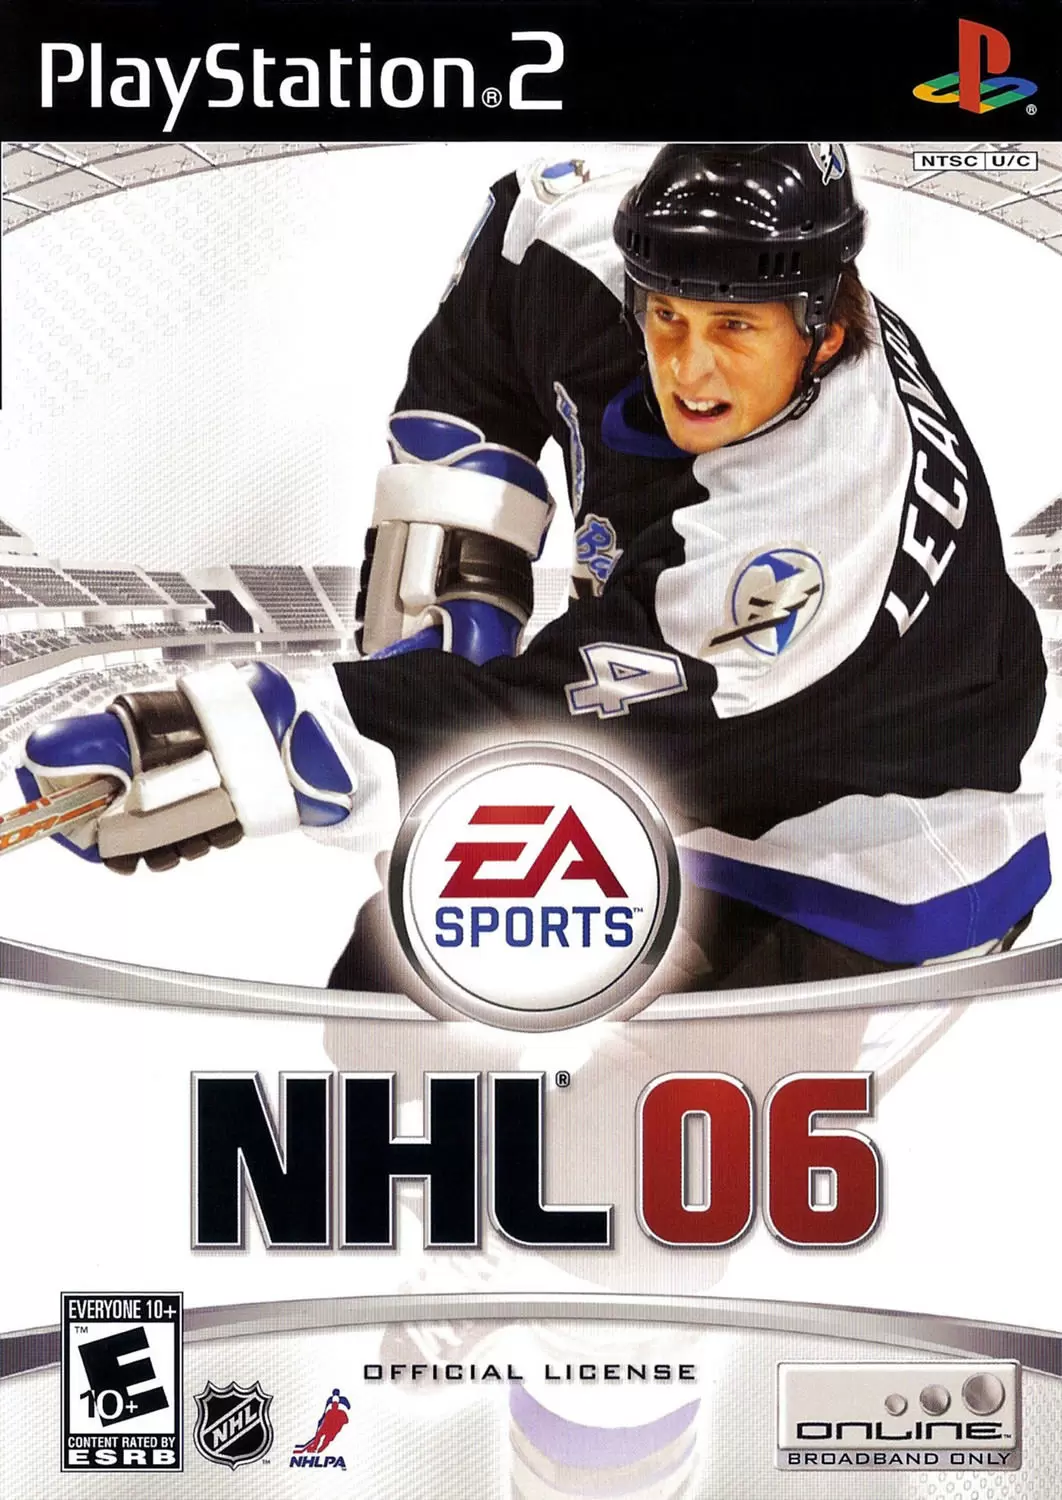 PS2 Games - NHL 06